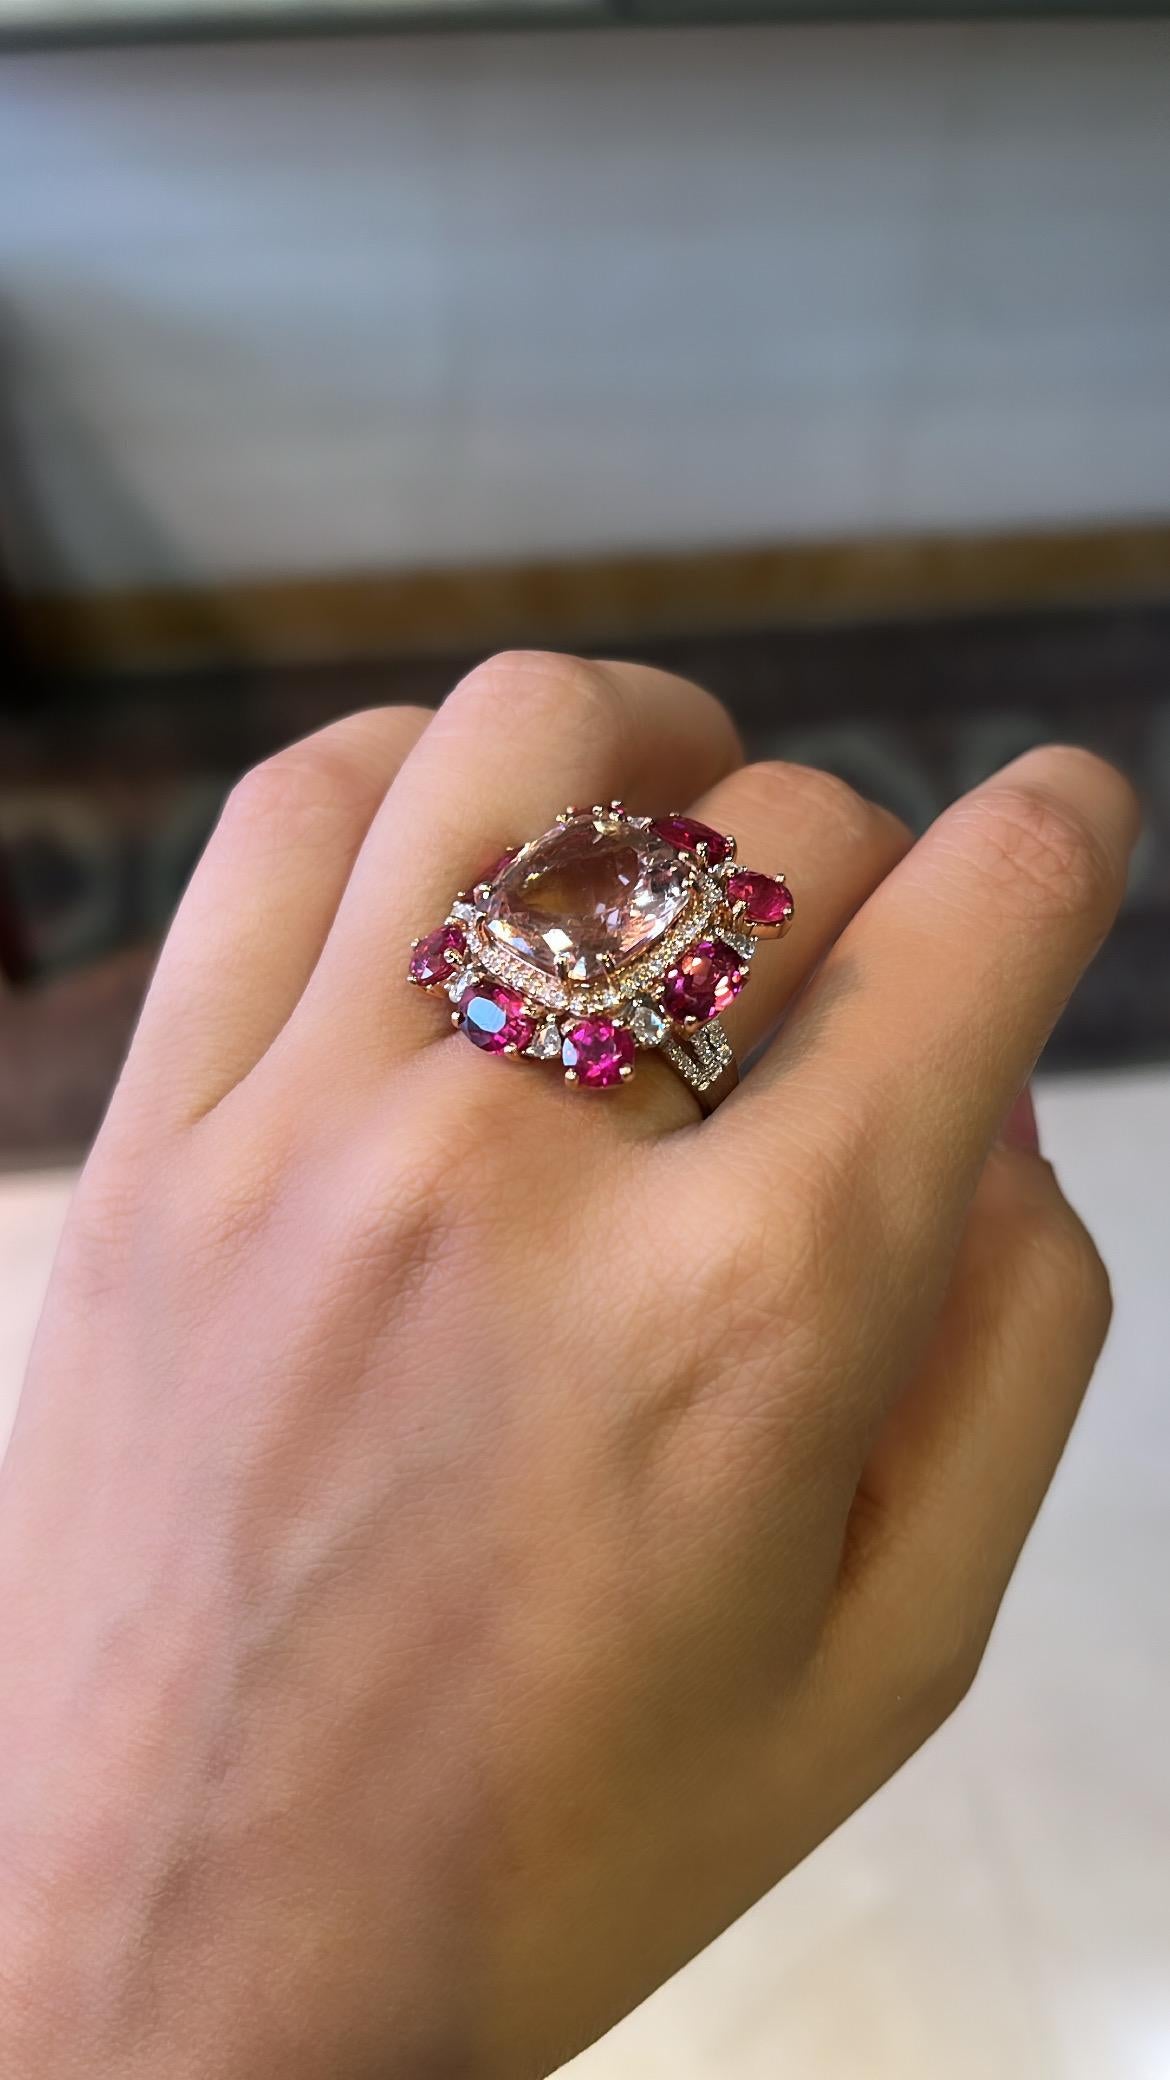 A very gorgeous and one of a kind, Morganite & Rubellite Cocktail Ring set in 18K Rose Gold & Diamonds. The weight of the Morganite is 9.27 carats. The weight of the Rubellite is 4.47 carats. The combined Diamonds weight is 0.75 carats. Net Gold